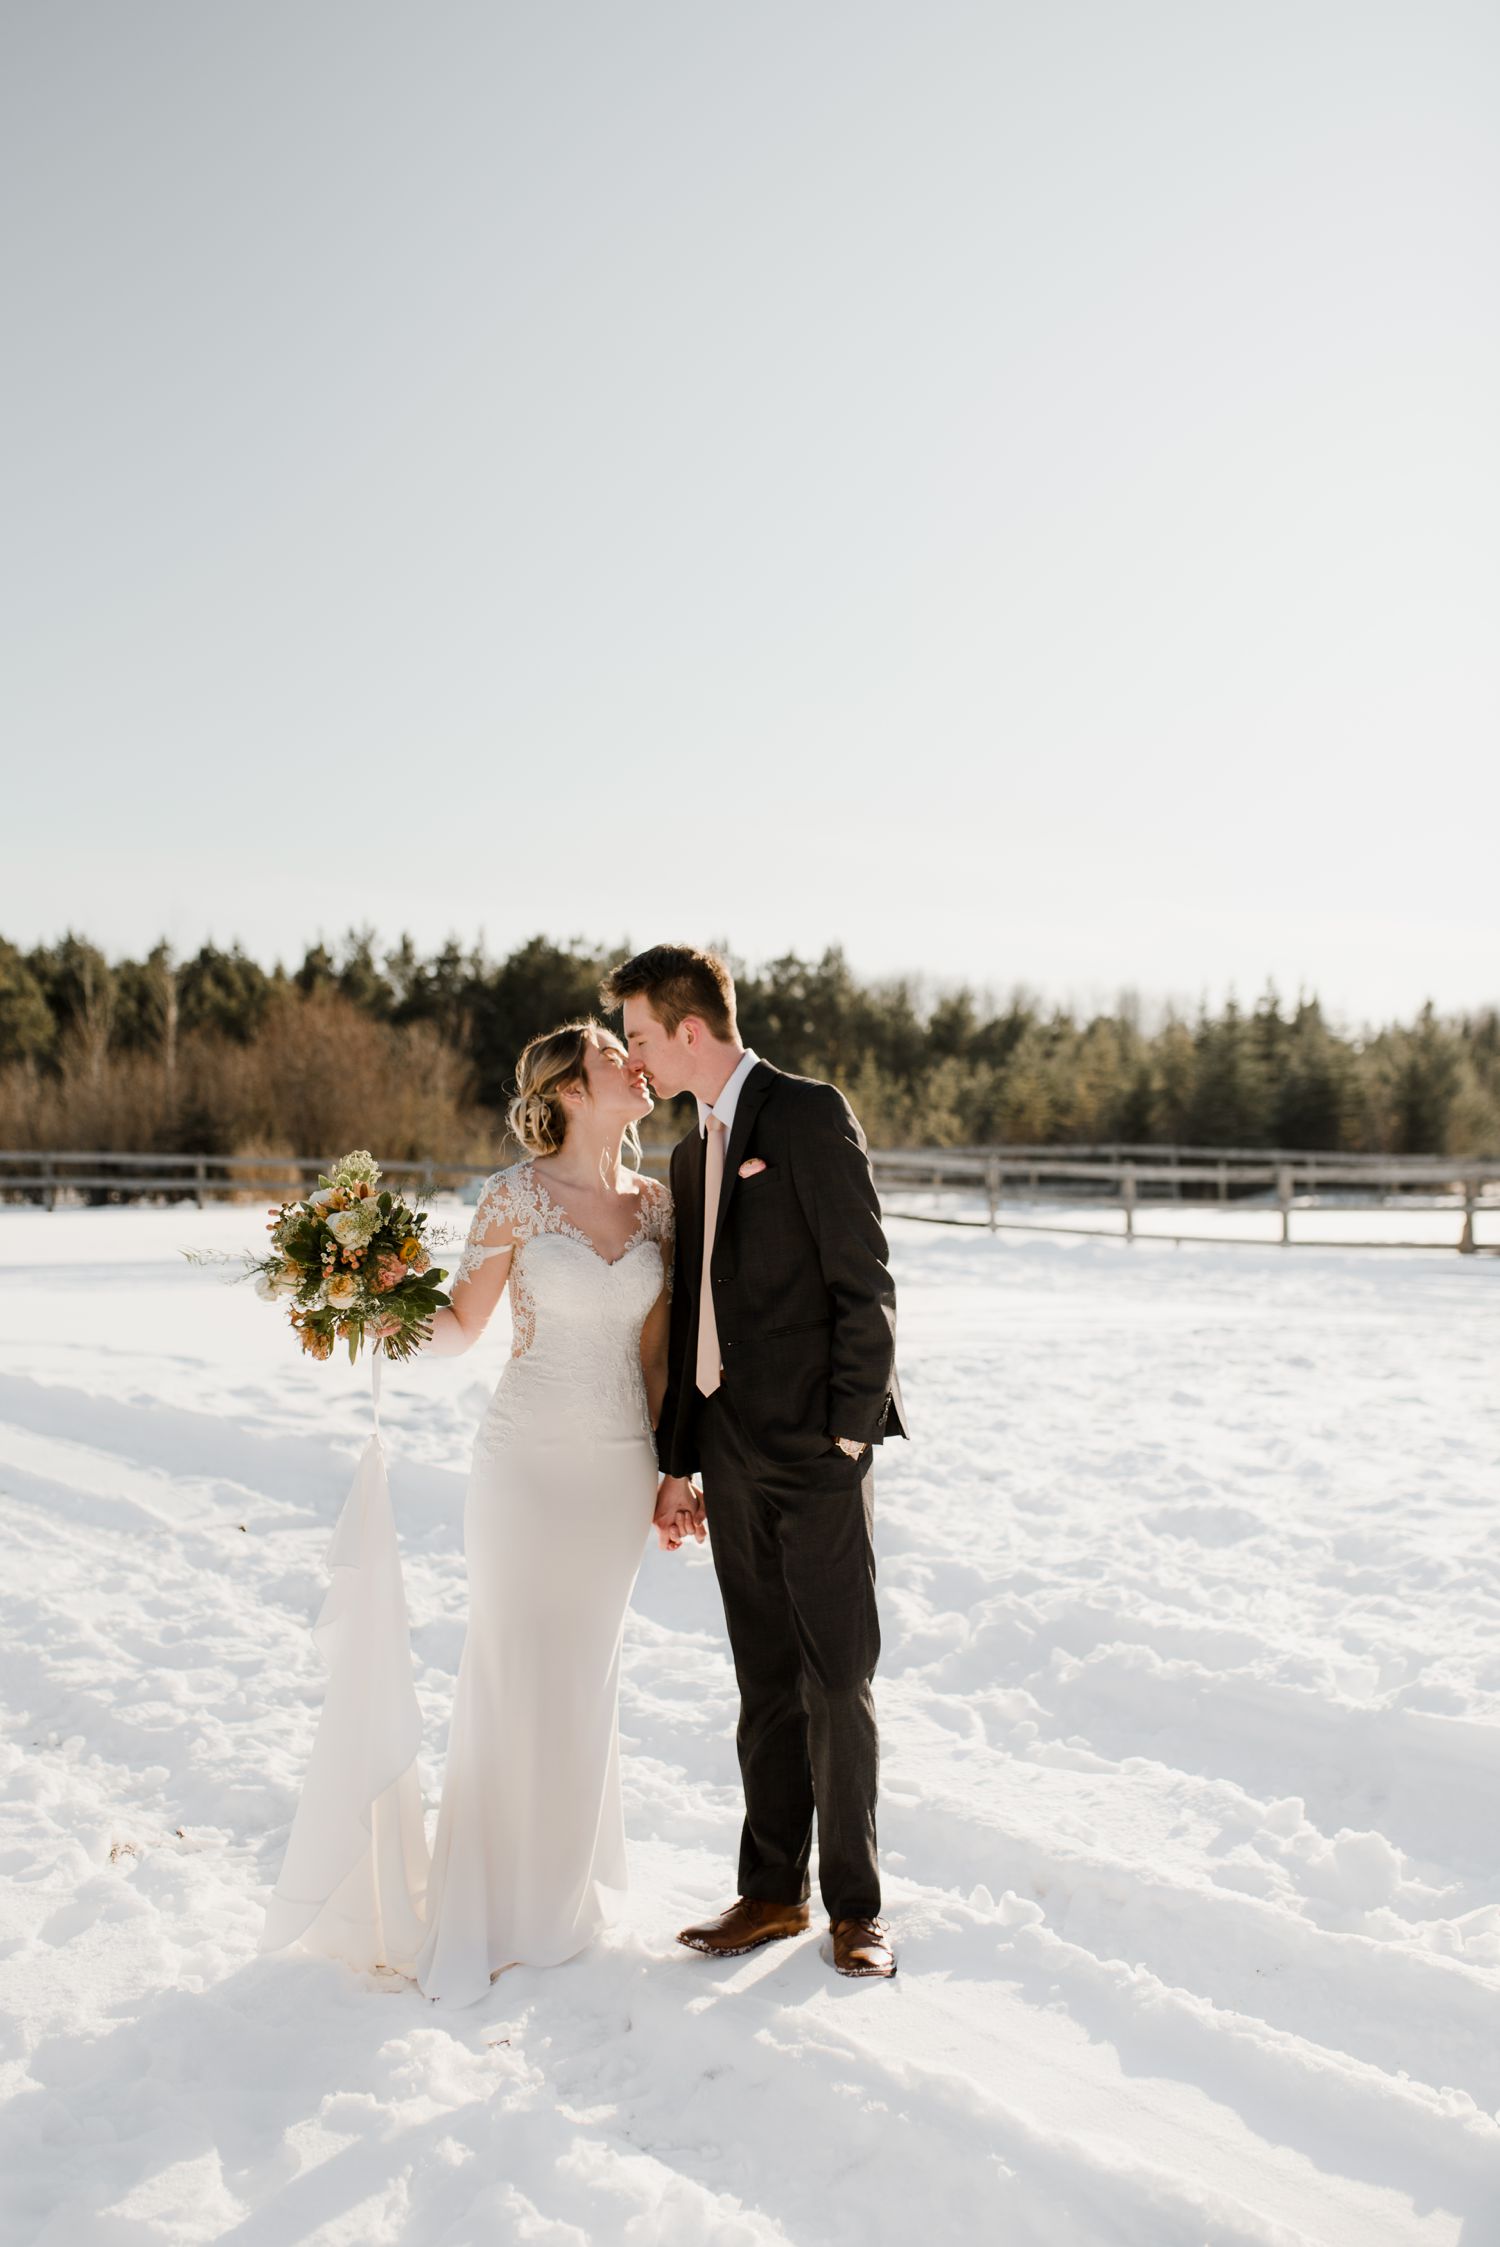 Canadian winter wedding styled shoot at a horse farm. Photographed by Vanessa Renae Photography, a Canadian and winnipeg wedding photographer.